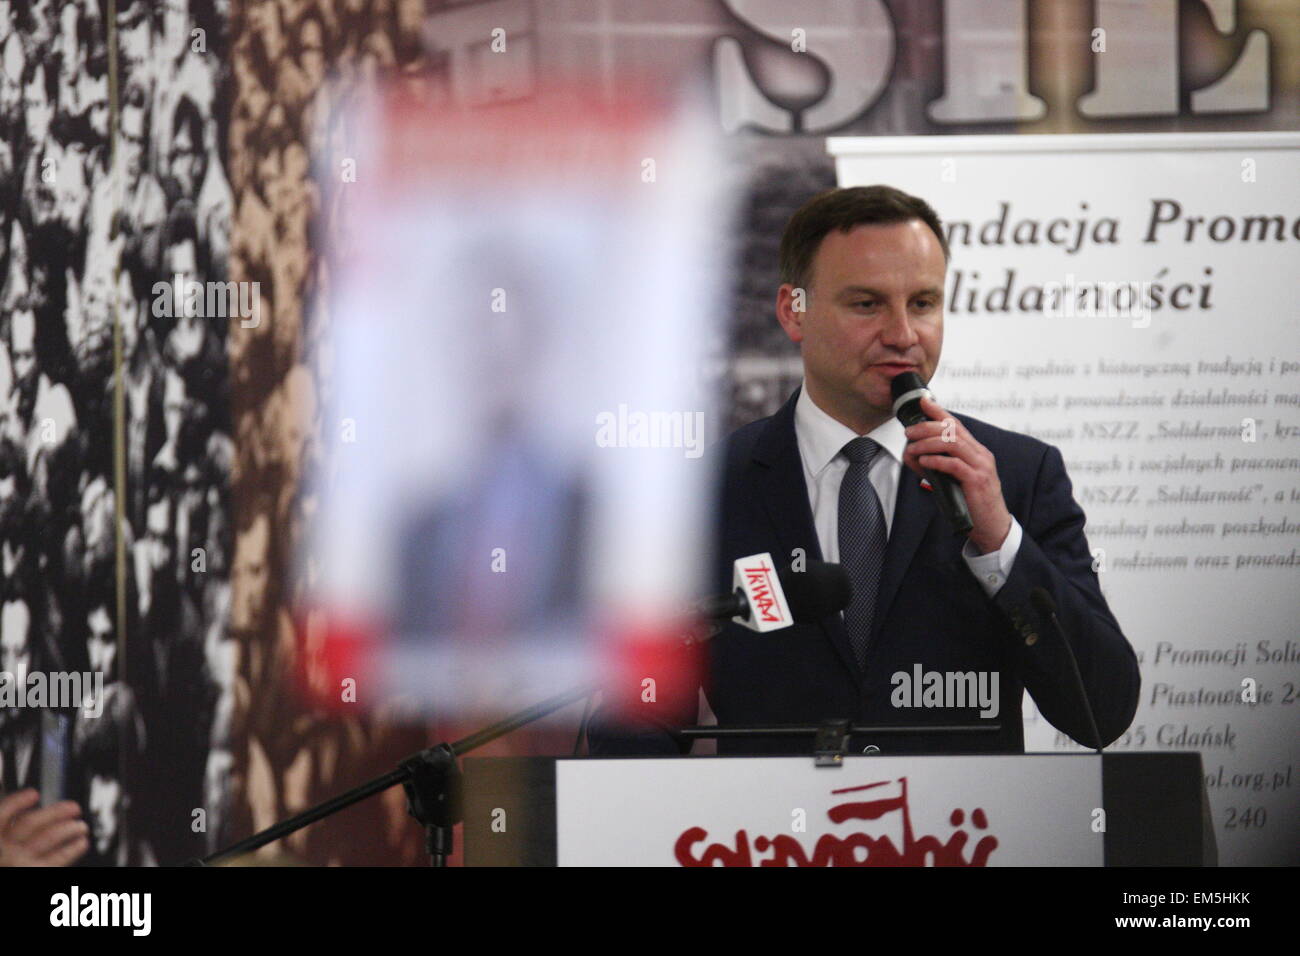 Gdansk, Poland 16th, April 2015 Law and Justice (PiS) party candidate for President of Poland Andrzej Duda visits Gdansk. Duda met with Piotr Duda - Solidarity Union chairman, and his supporters at the historical BHP hall in Gdansk Shipyard. Presidential elections in Poland will be held on May 10. Credit:  Michal Fludra/Alamy Live News Stock Photo